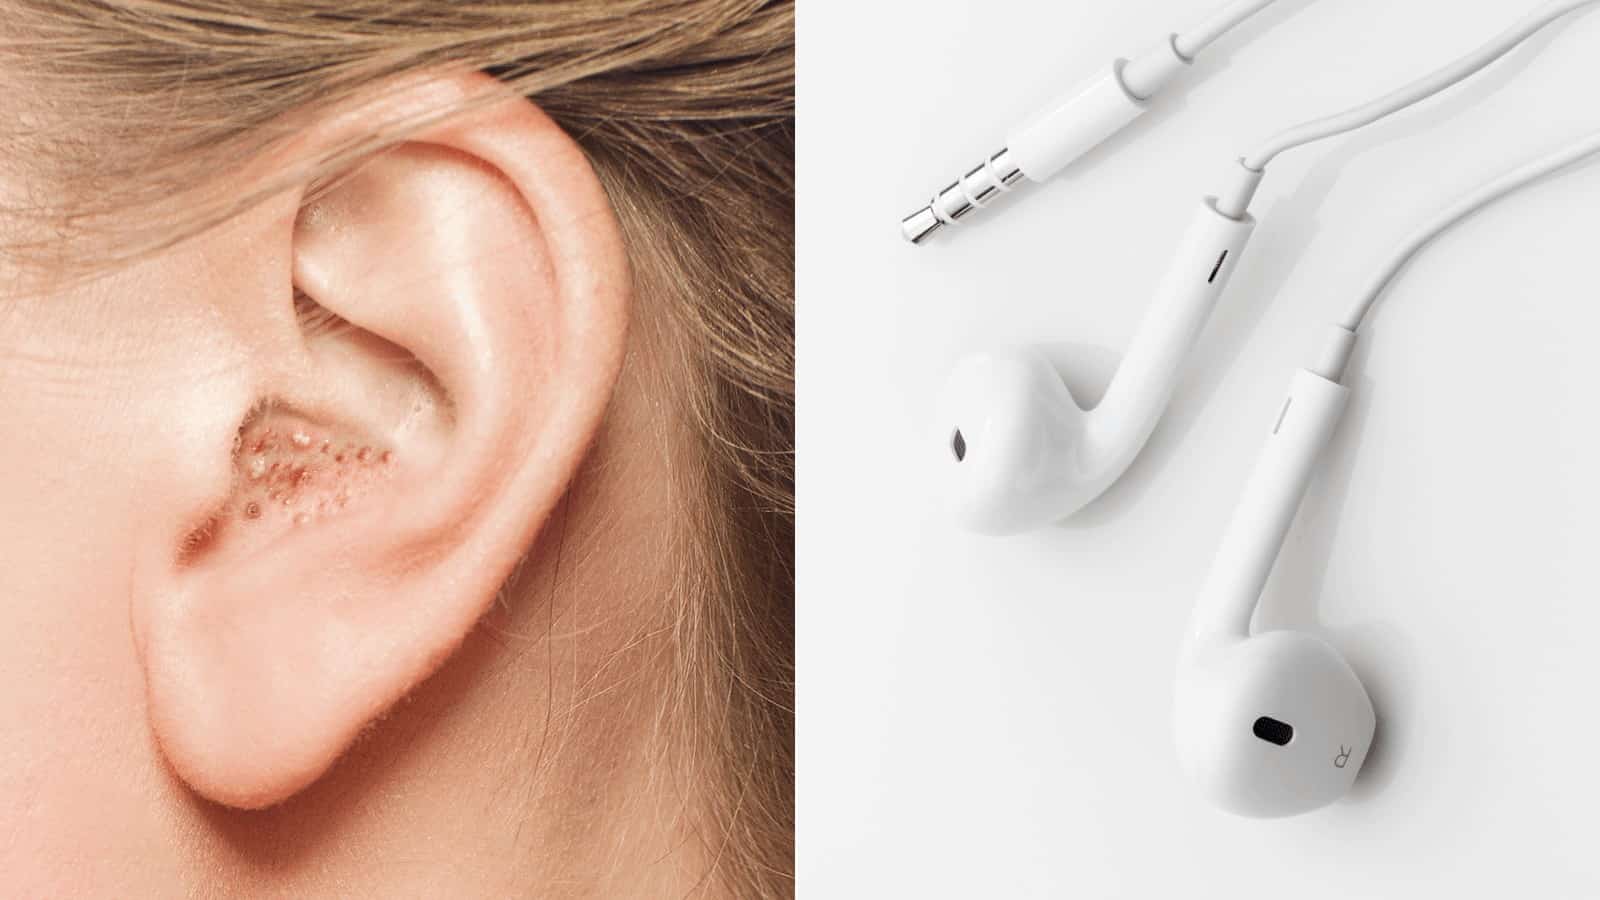 Doctors Warn About What Happens to Your Ears When You Wear Headphones Too Long